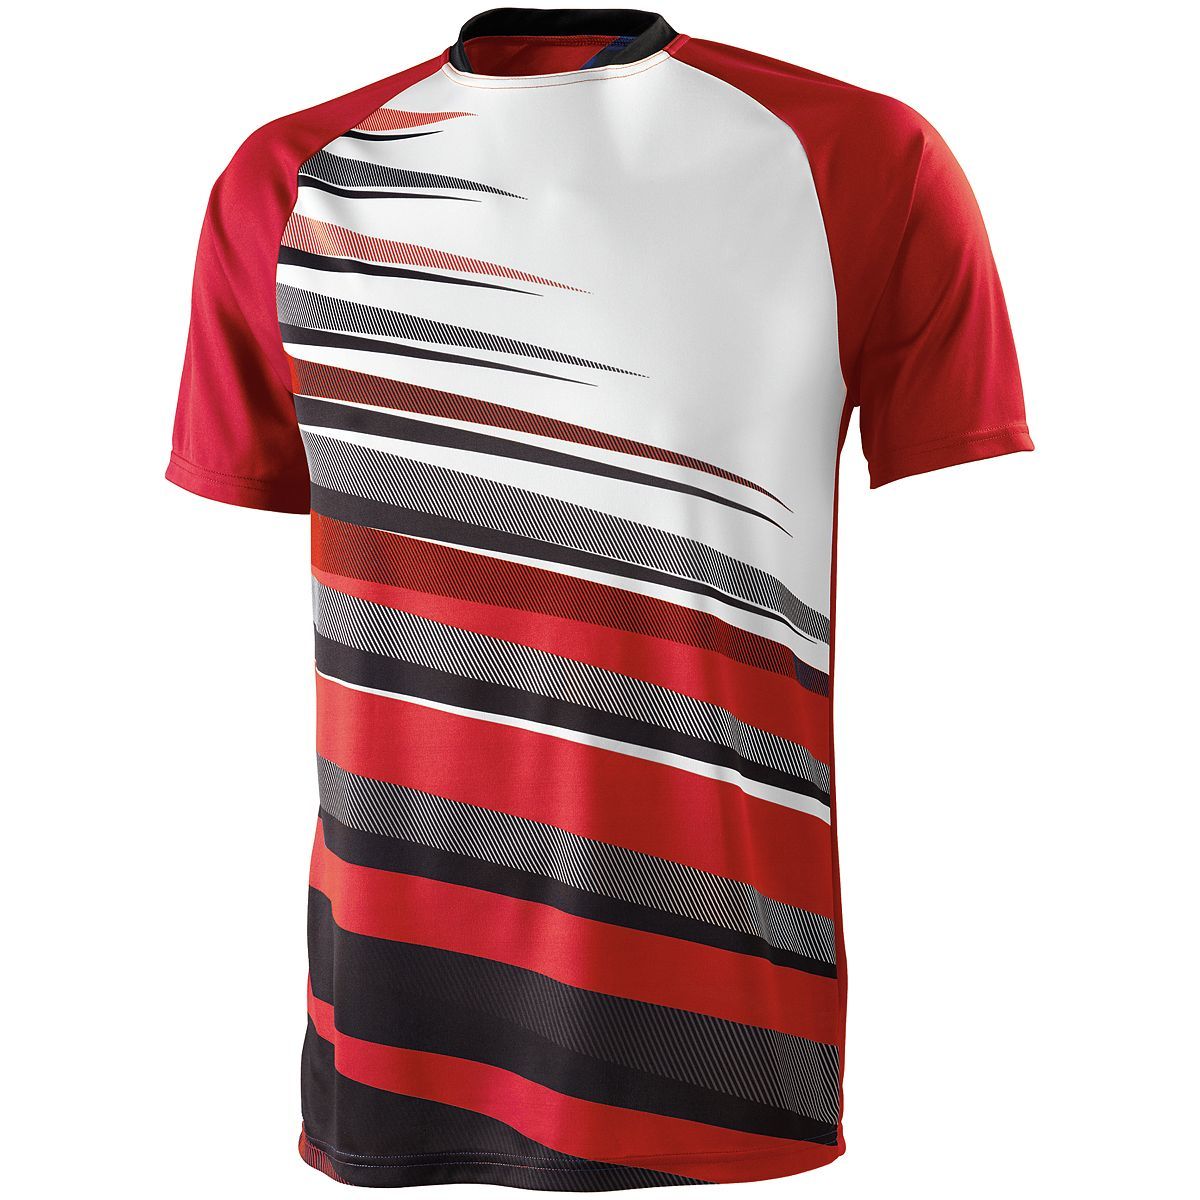 High 5 Adult Galactic Jersey in Scarlet/Black/White  -Part of the Adult, Adult-Jersey, High5-Products, Soccer, Shirts, All-Sports-1 product lines at KanaleyCreations.com